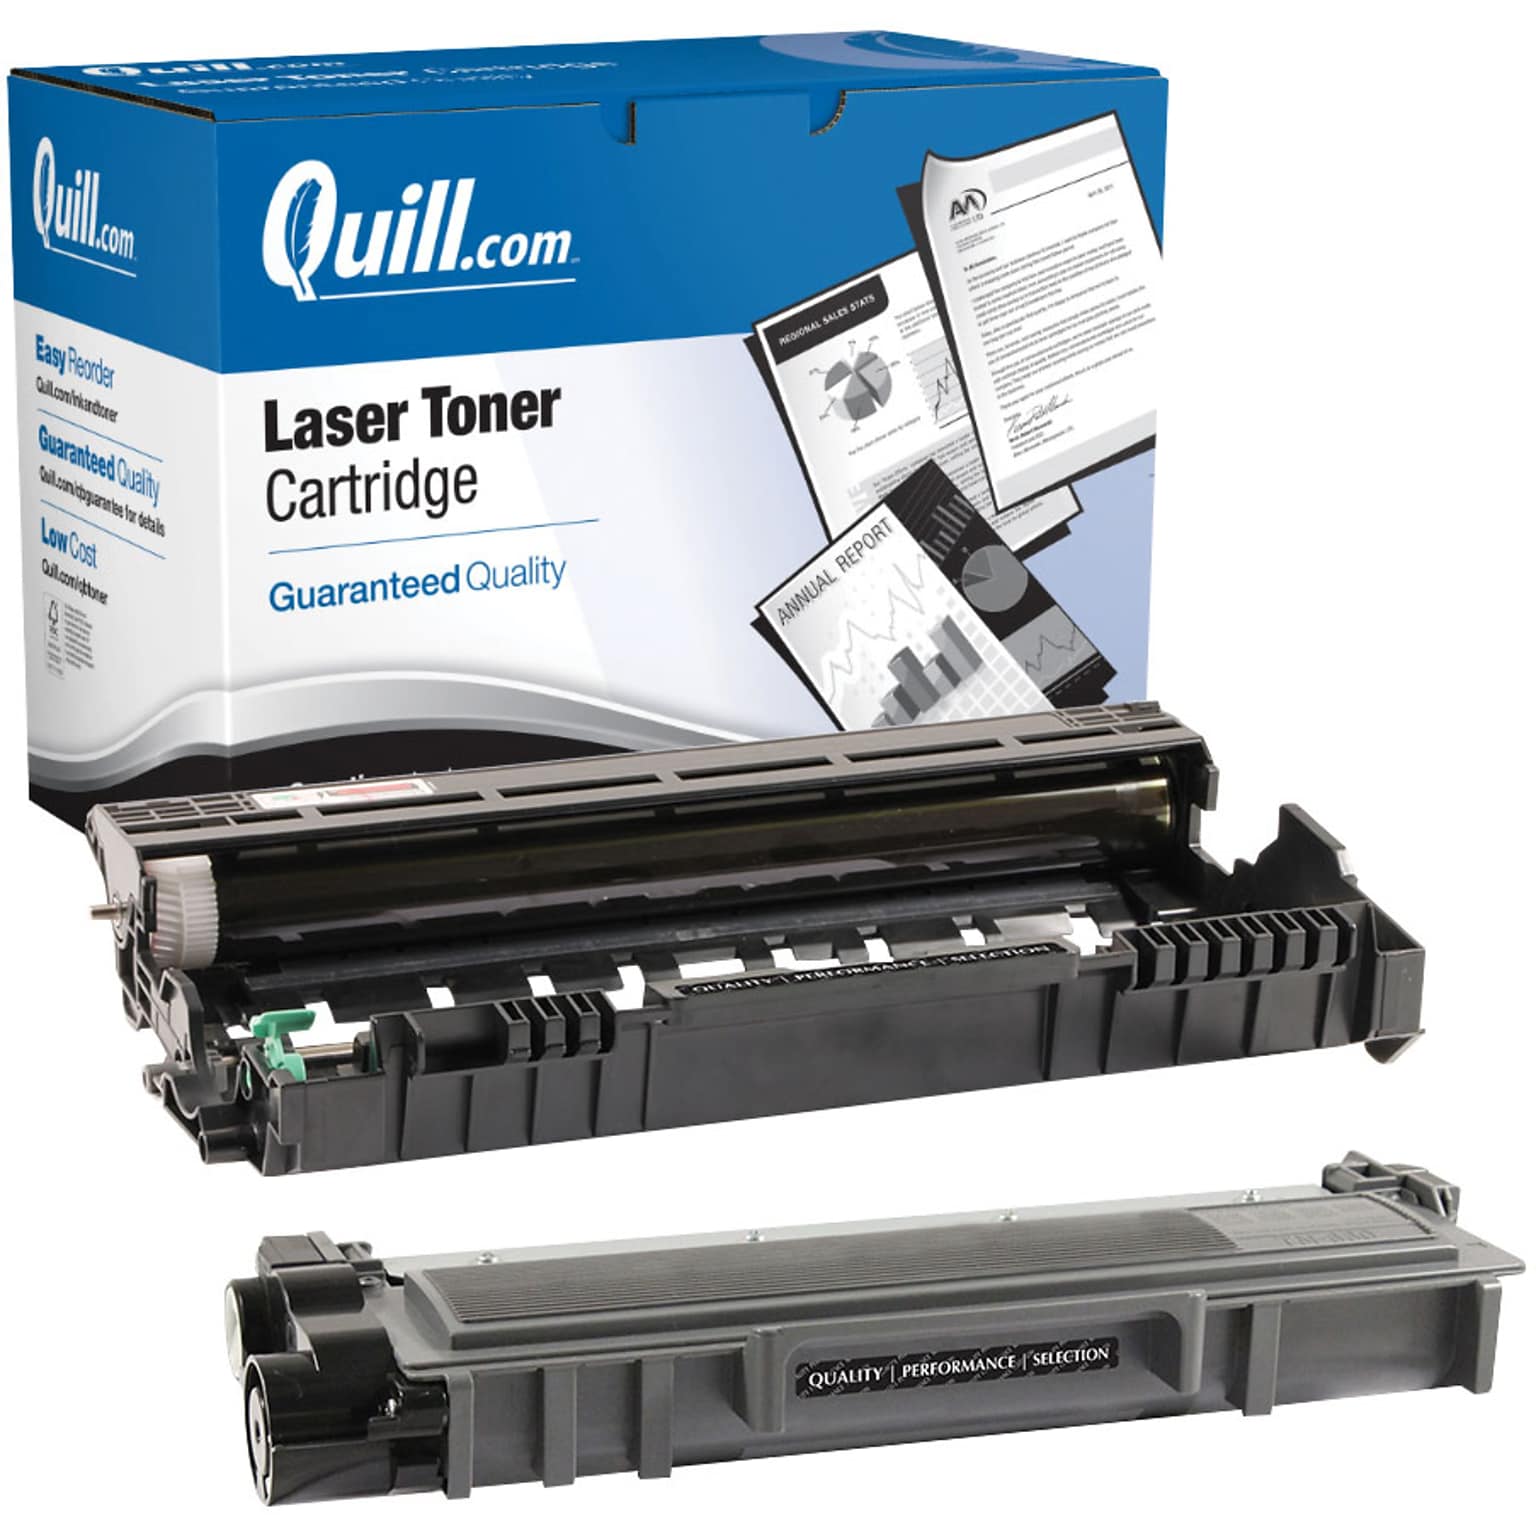 Quill Brand® Remanufactured Black HY Laser Toner Cartridge/Black Standard Yield Replacement for Brother TN660 and DR630